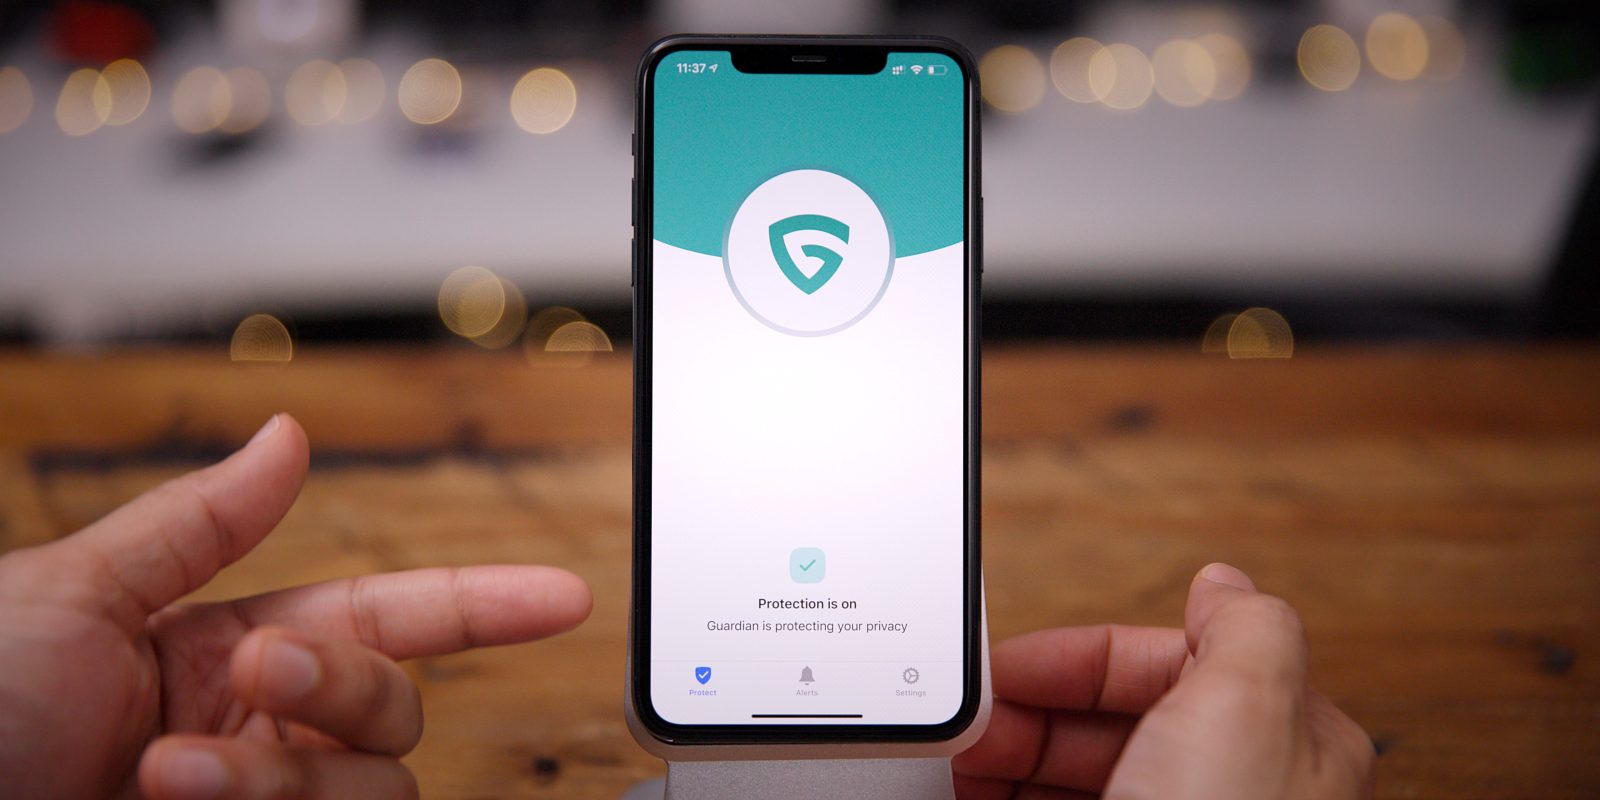 Guardian VPN for iOS acquired by DNSFilter, will remain available as its own app